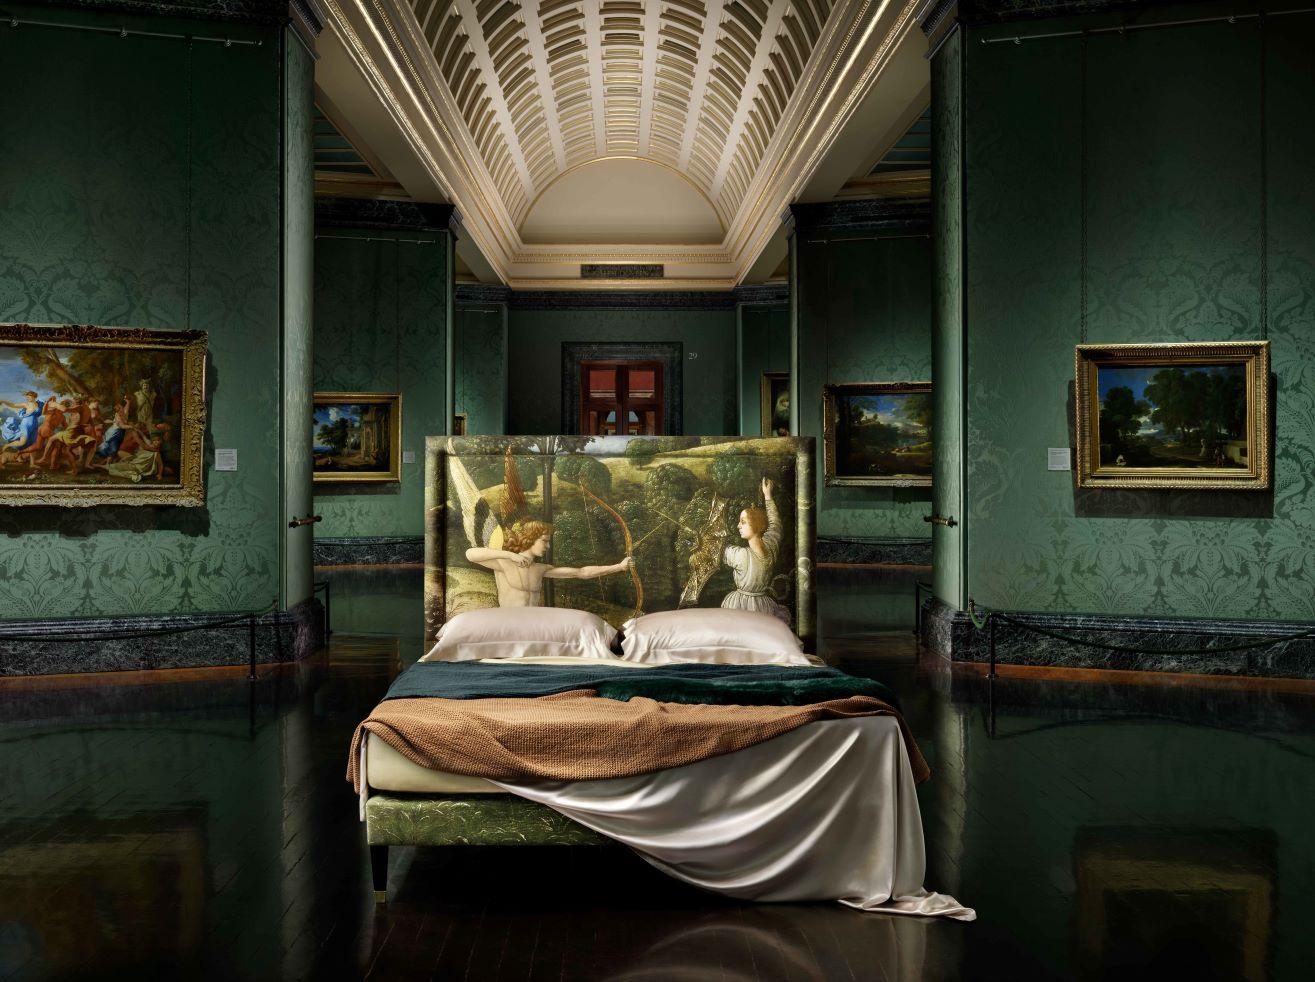 In collaboration with The National Gallery in London, Savoir has created a charming bed upholstered in a specially printed linen fabric featuring Gherardo Di Giovanni Del Fora's 'The Combat of Love and Chastity'. The classic Felix headboard with a